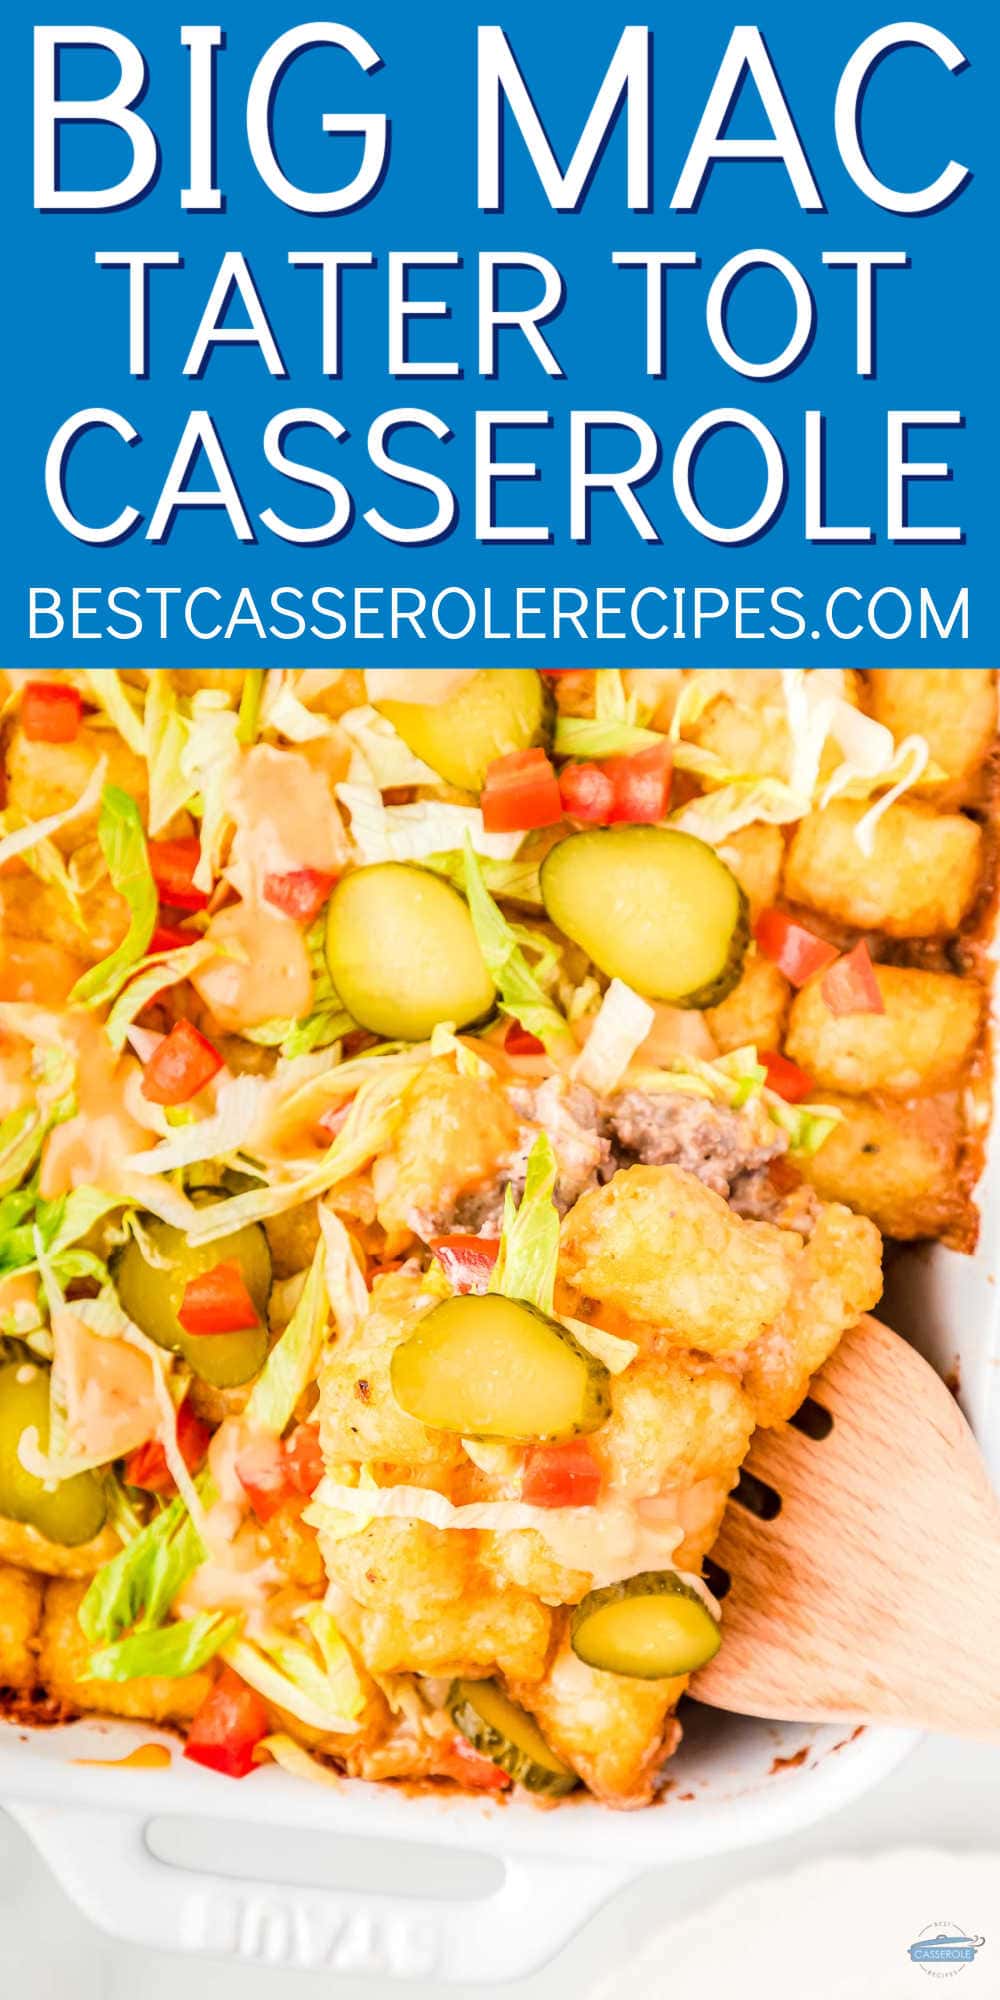 big mac tater tot casserole with blue banner and text